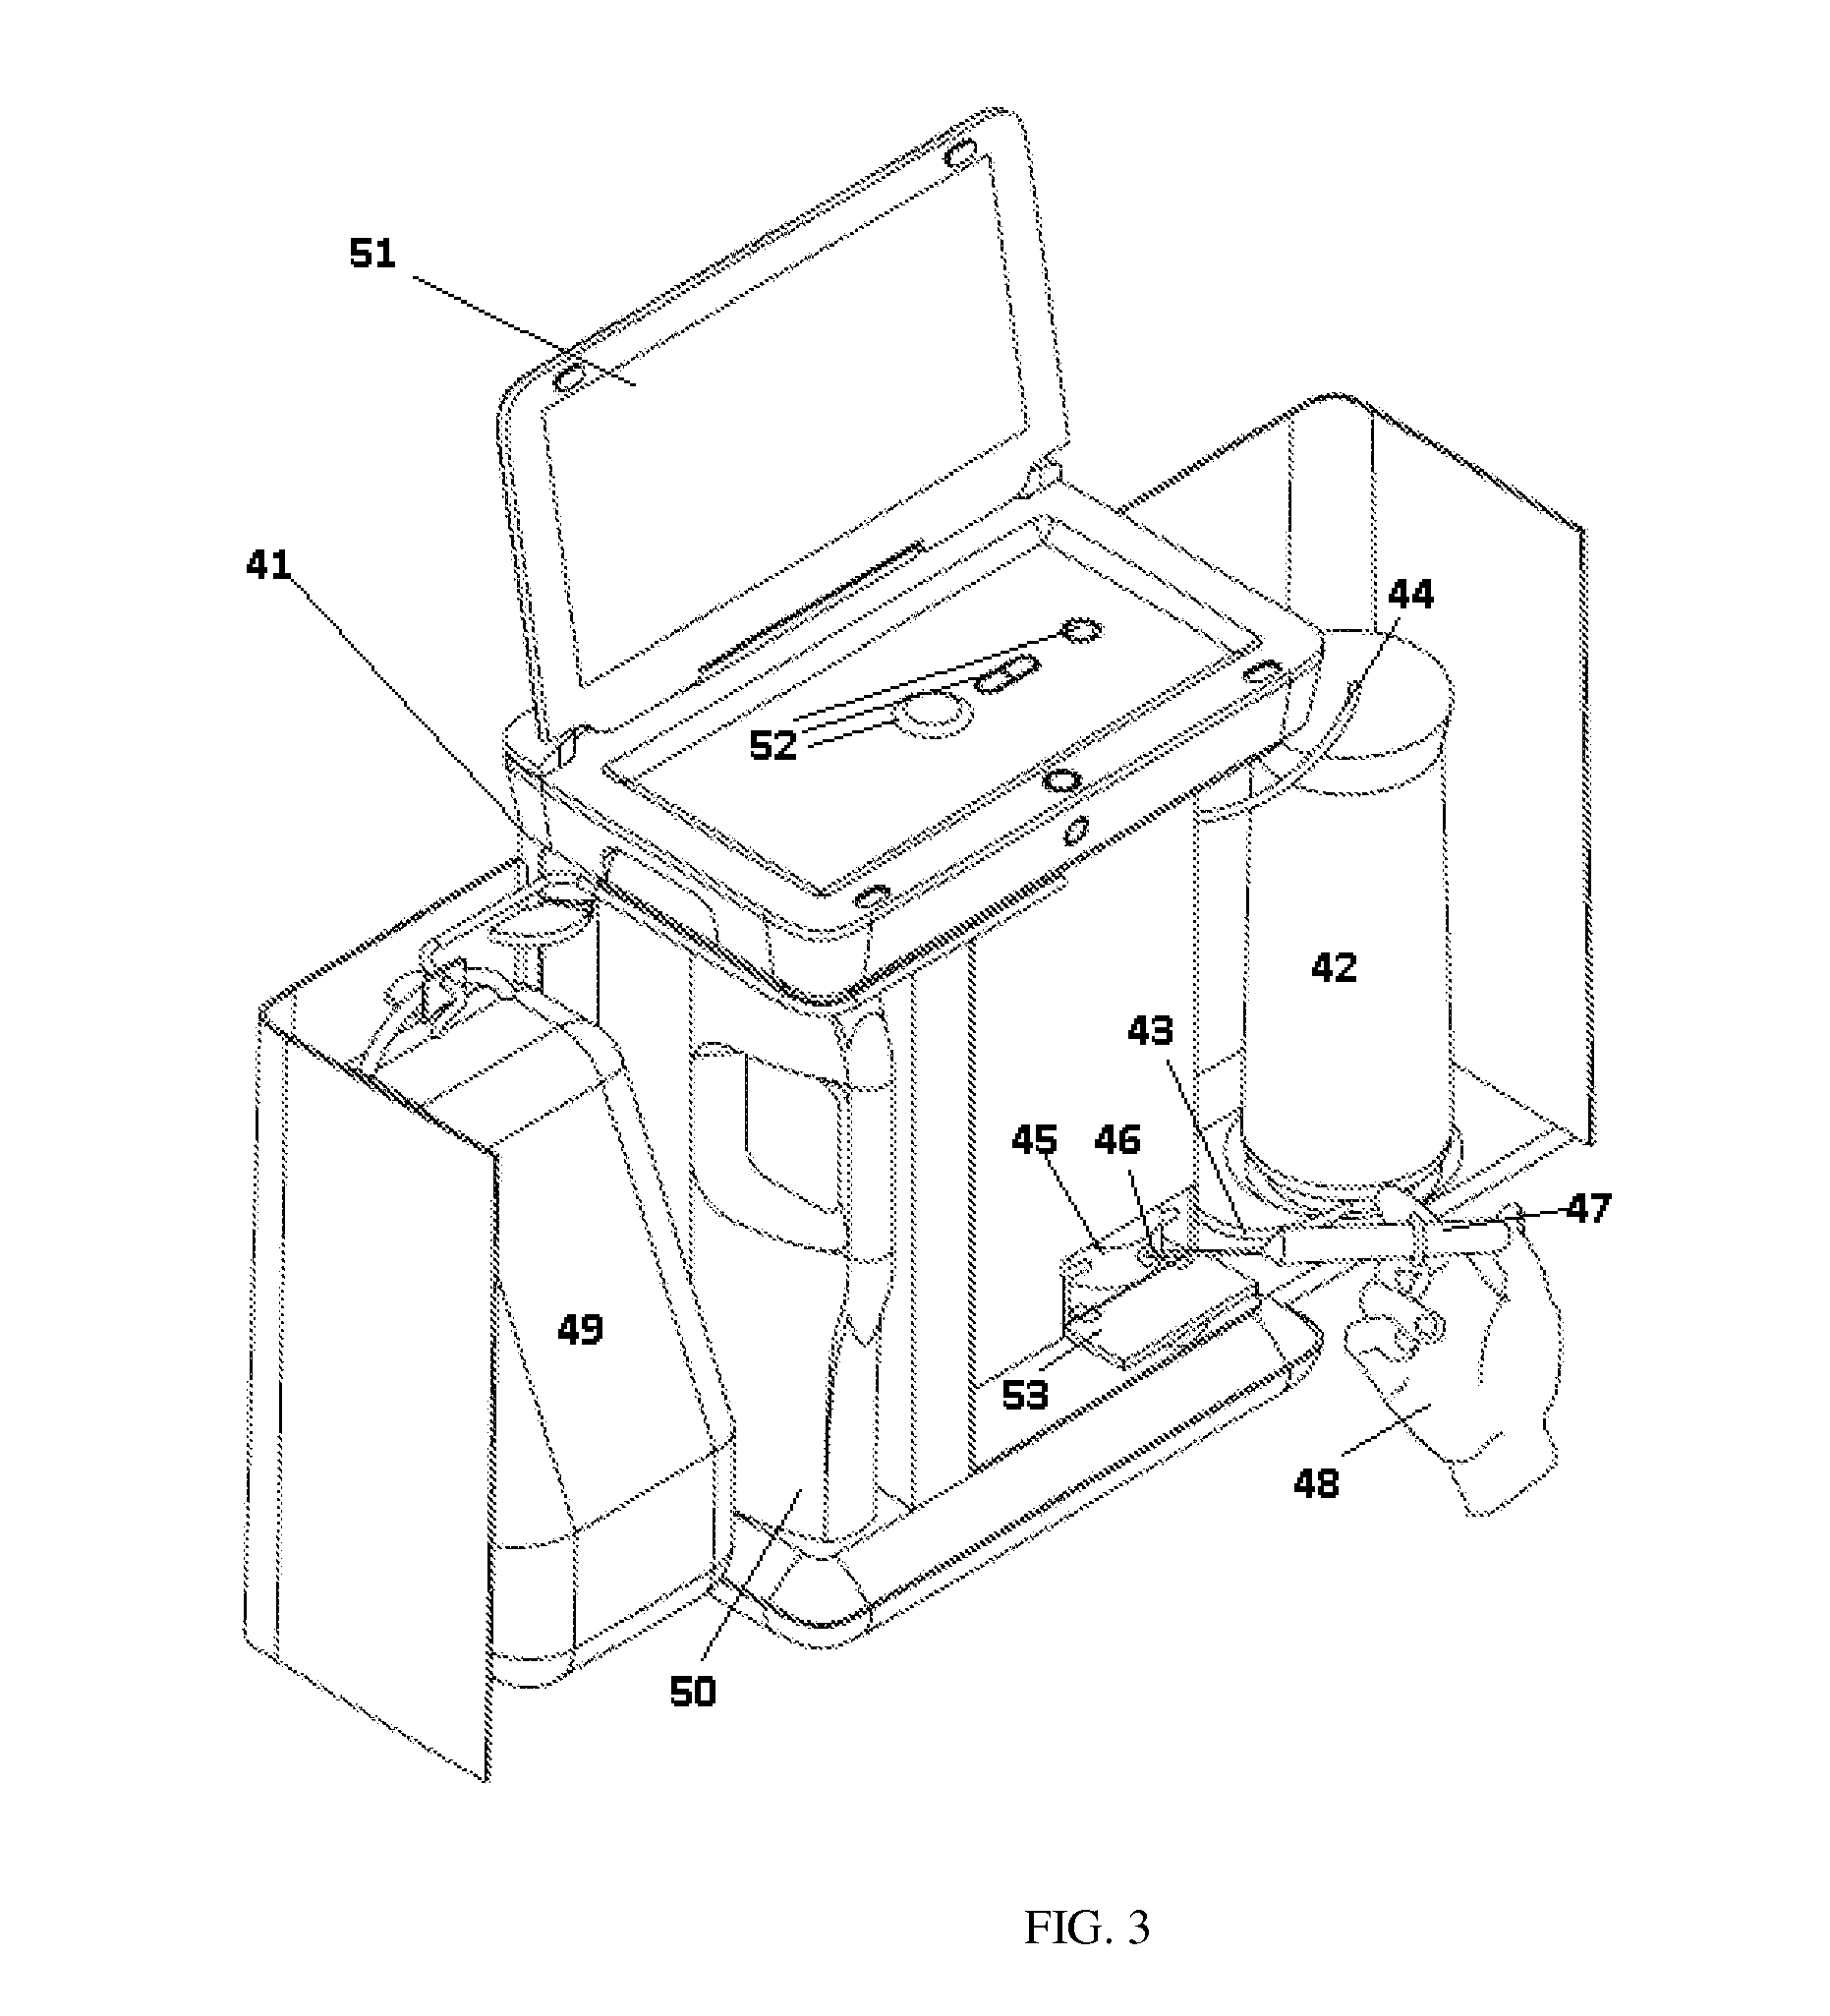 Urease introduction system for replenishing urease in a sorbent cartridge